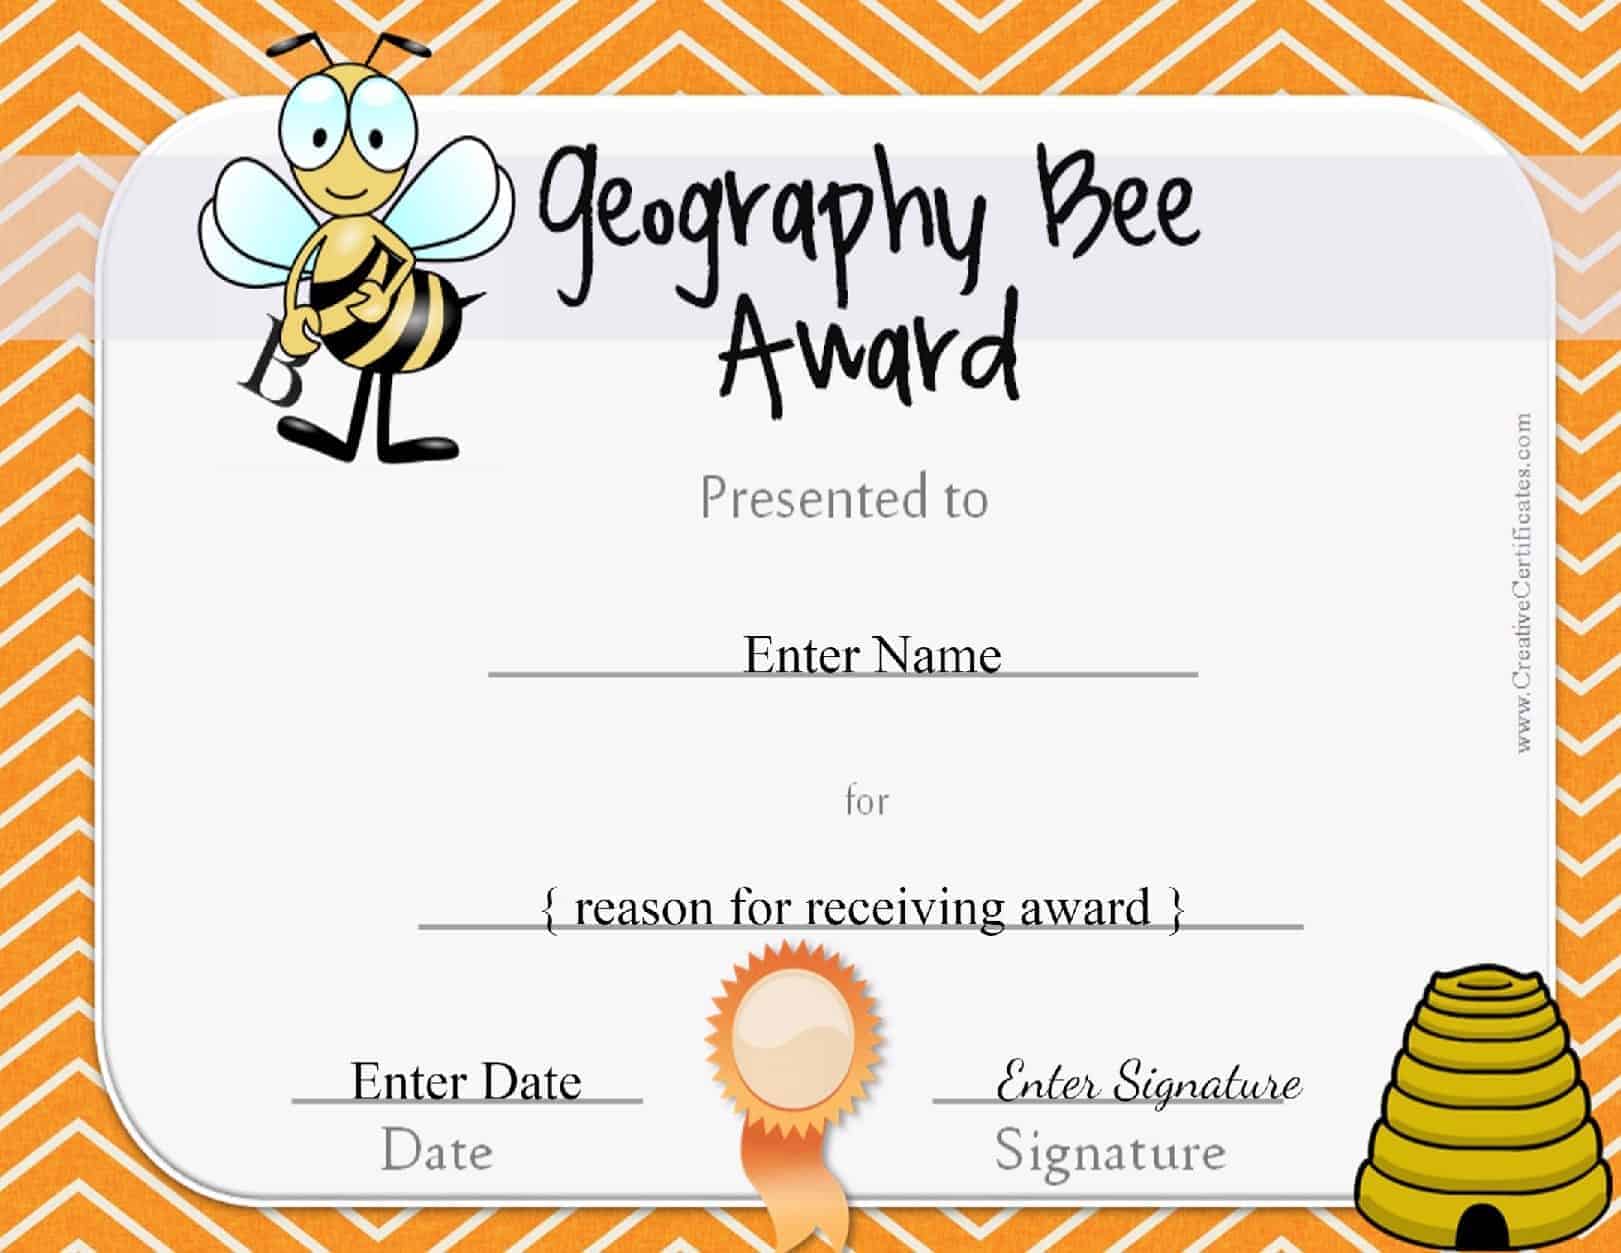 Geography Bee Awards